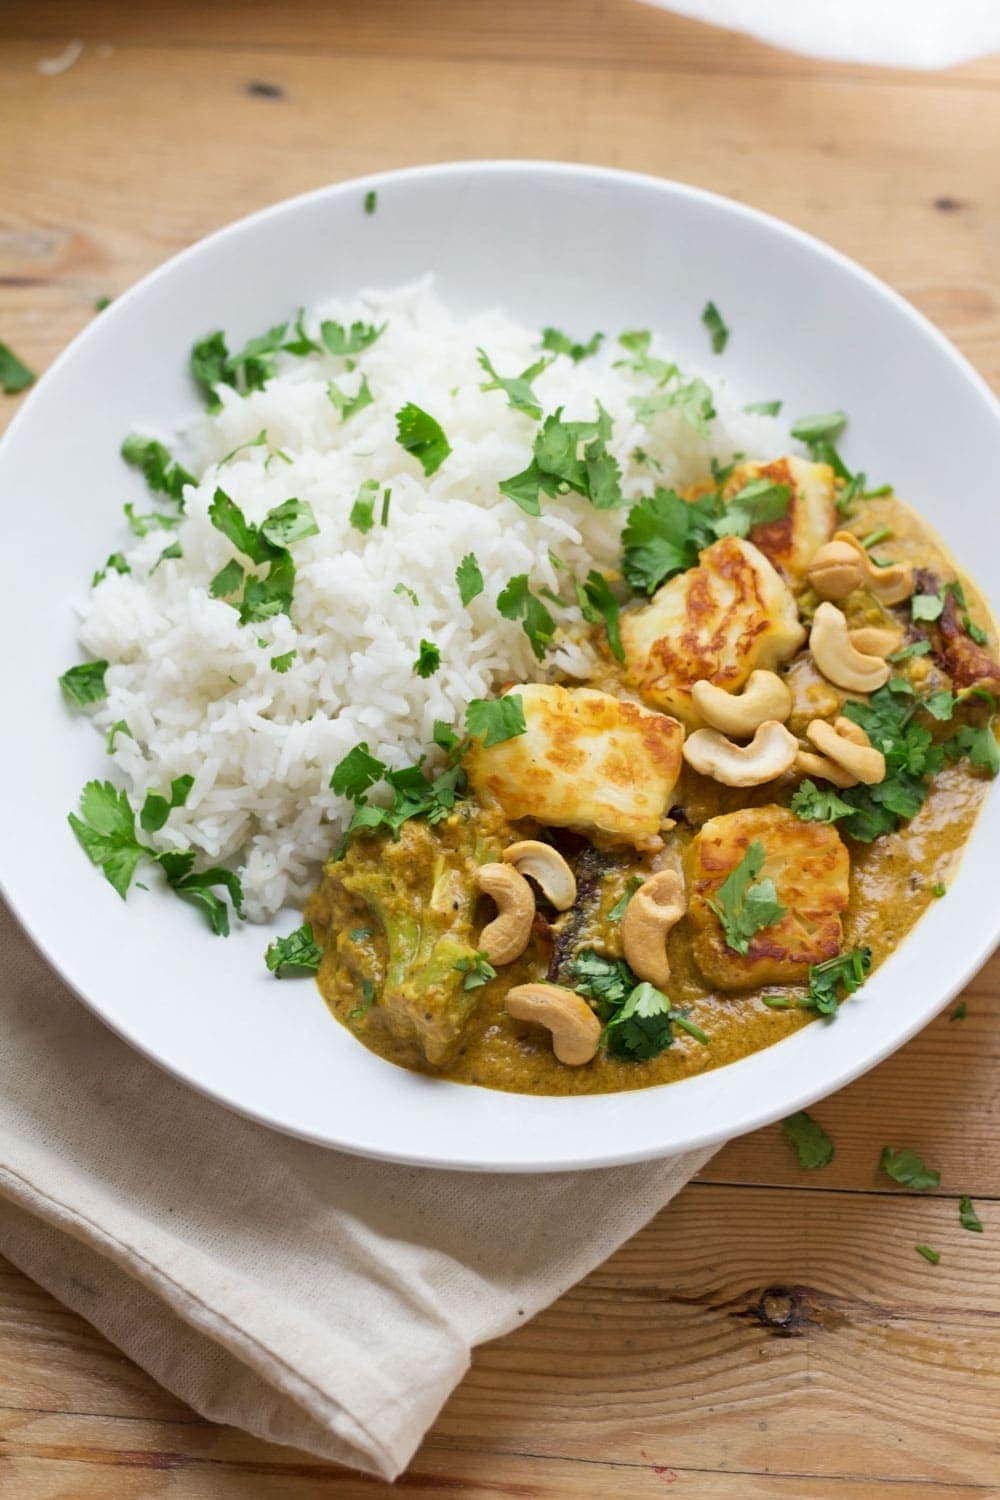 Using halloumi in this creamy cashew nut curry makes a tasty change from a traditional curry. Sprinkle with a handful of whole cashews for an extra crunch.